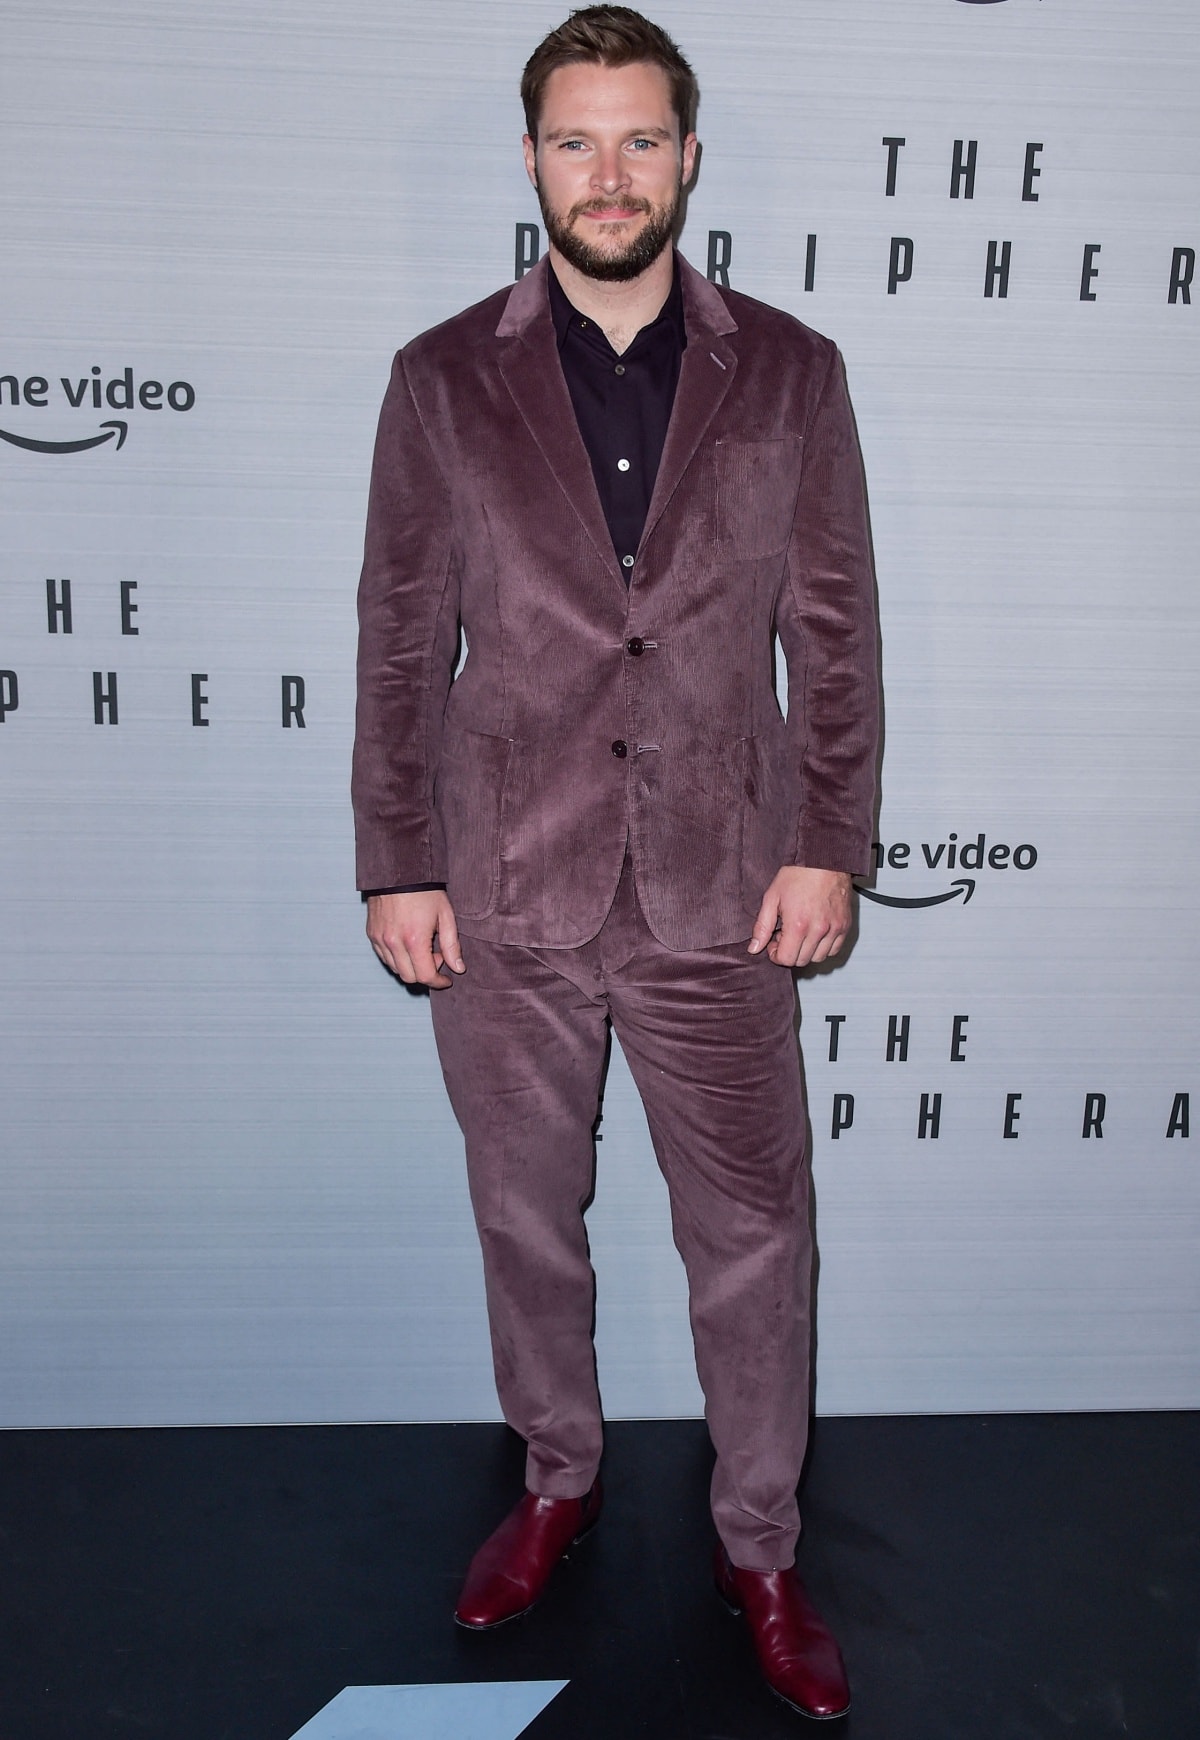 Jack Reynor attending the Los Angeles premiere of The Peripheral